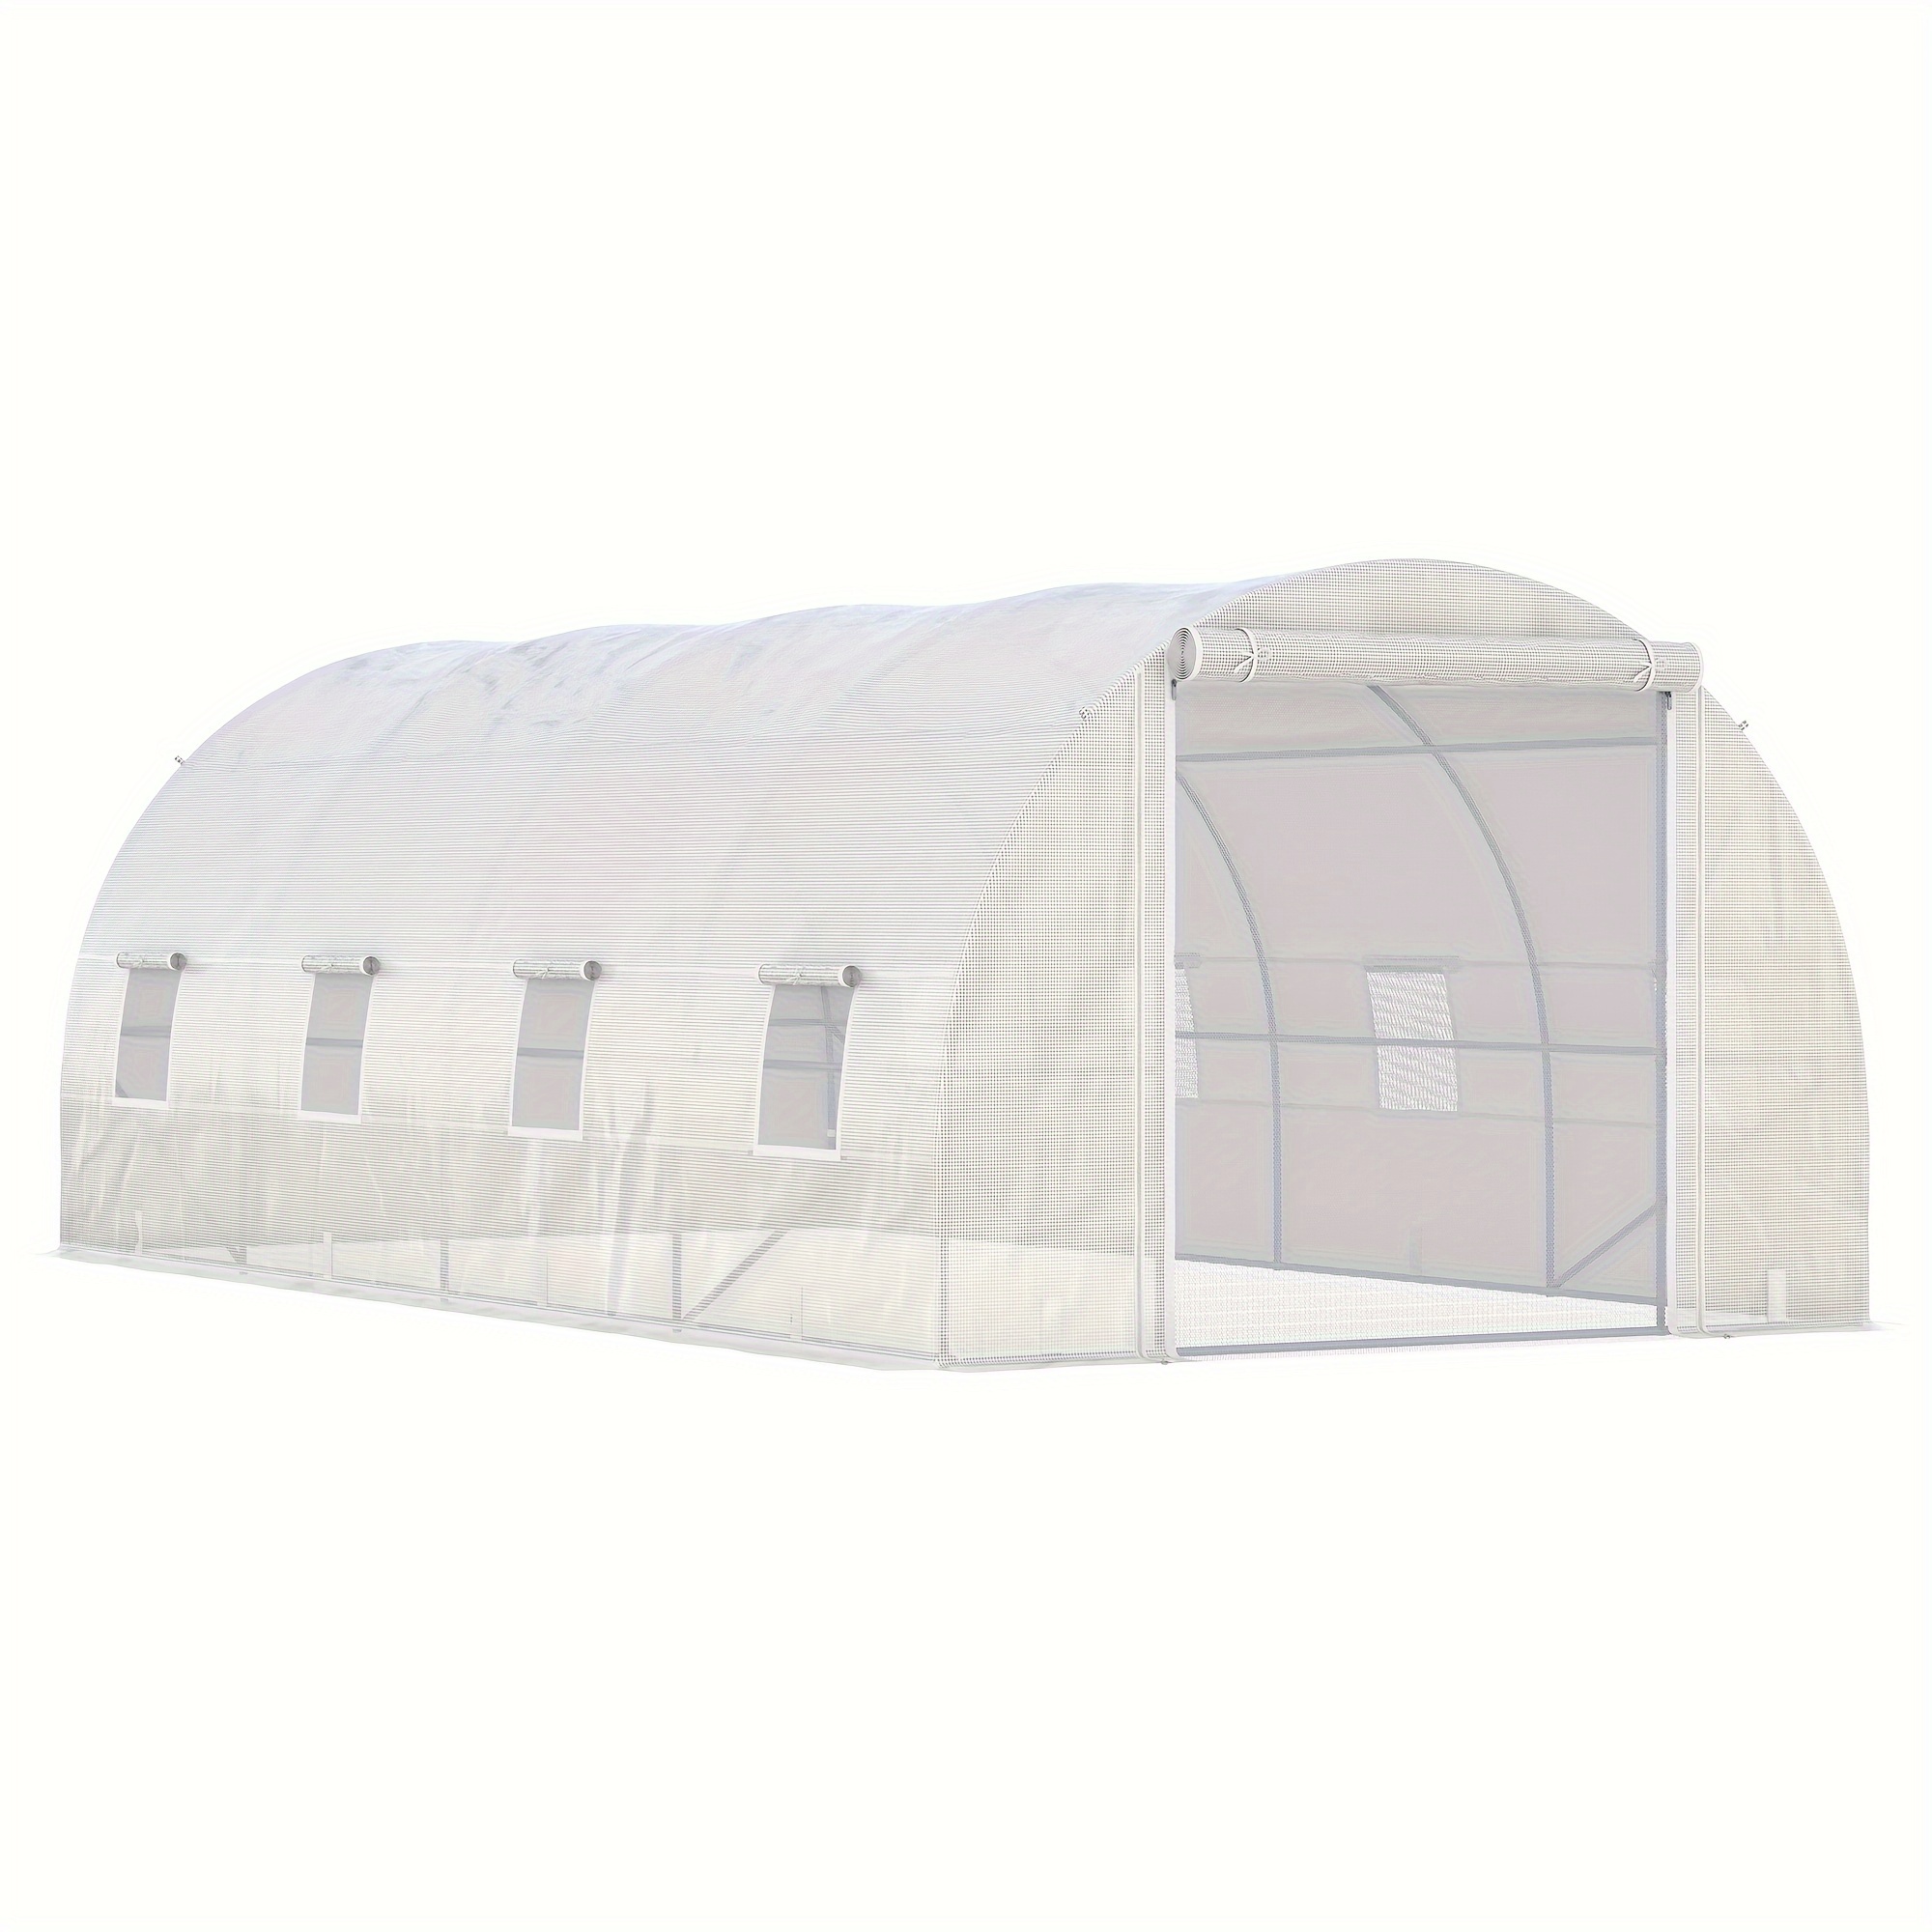 

Outsunny 19' X 10' X 7' Walk-in Tunnel Greenhouse With Zippered Door & 8 Mesh Windows, Large Garden Green House Kit, Galvanized Steel Frame, White